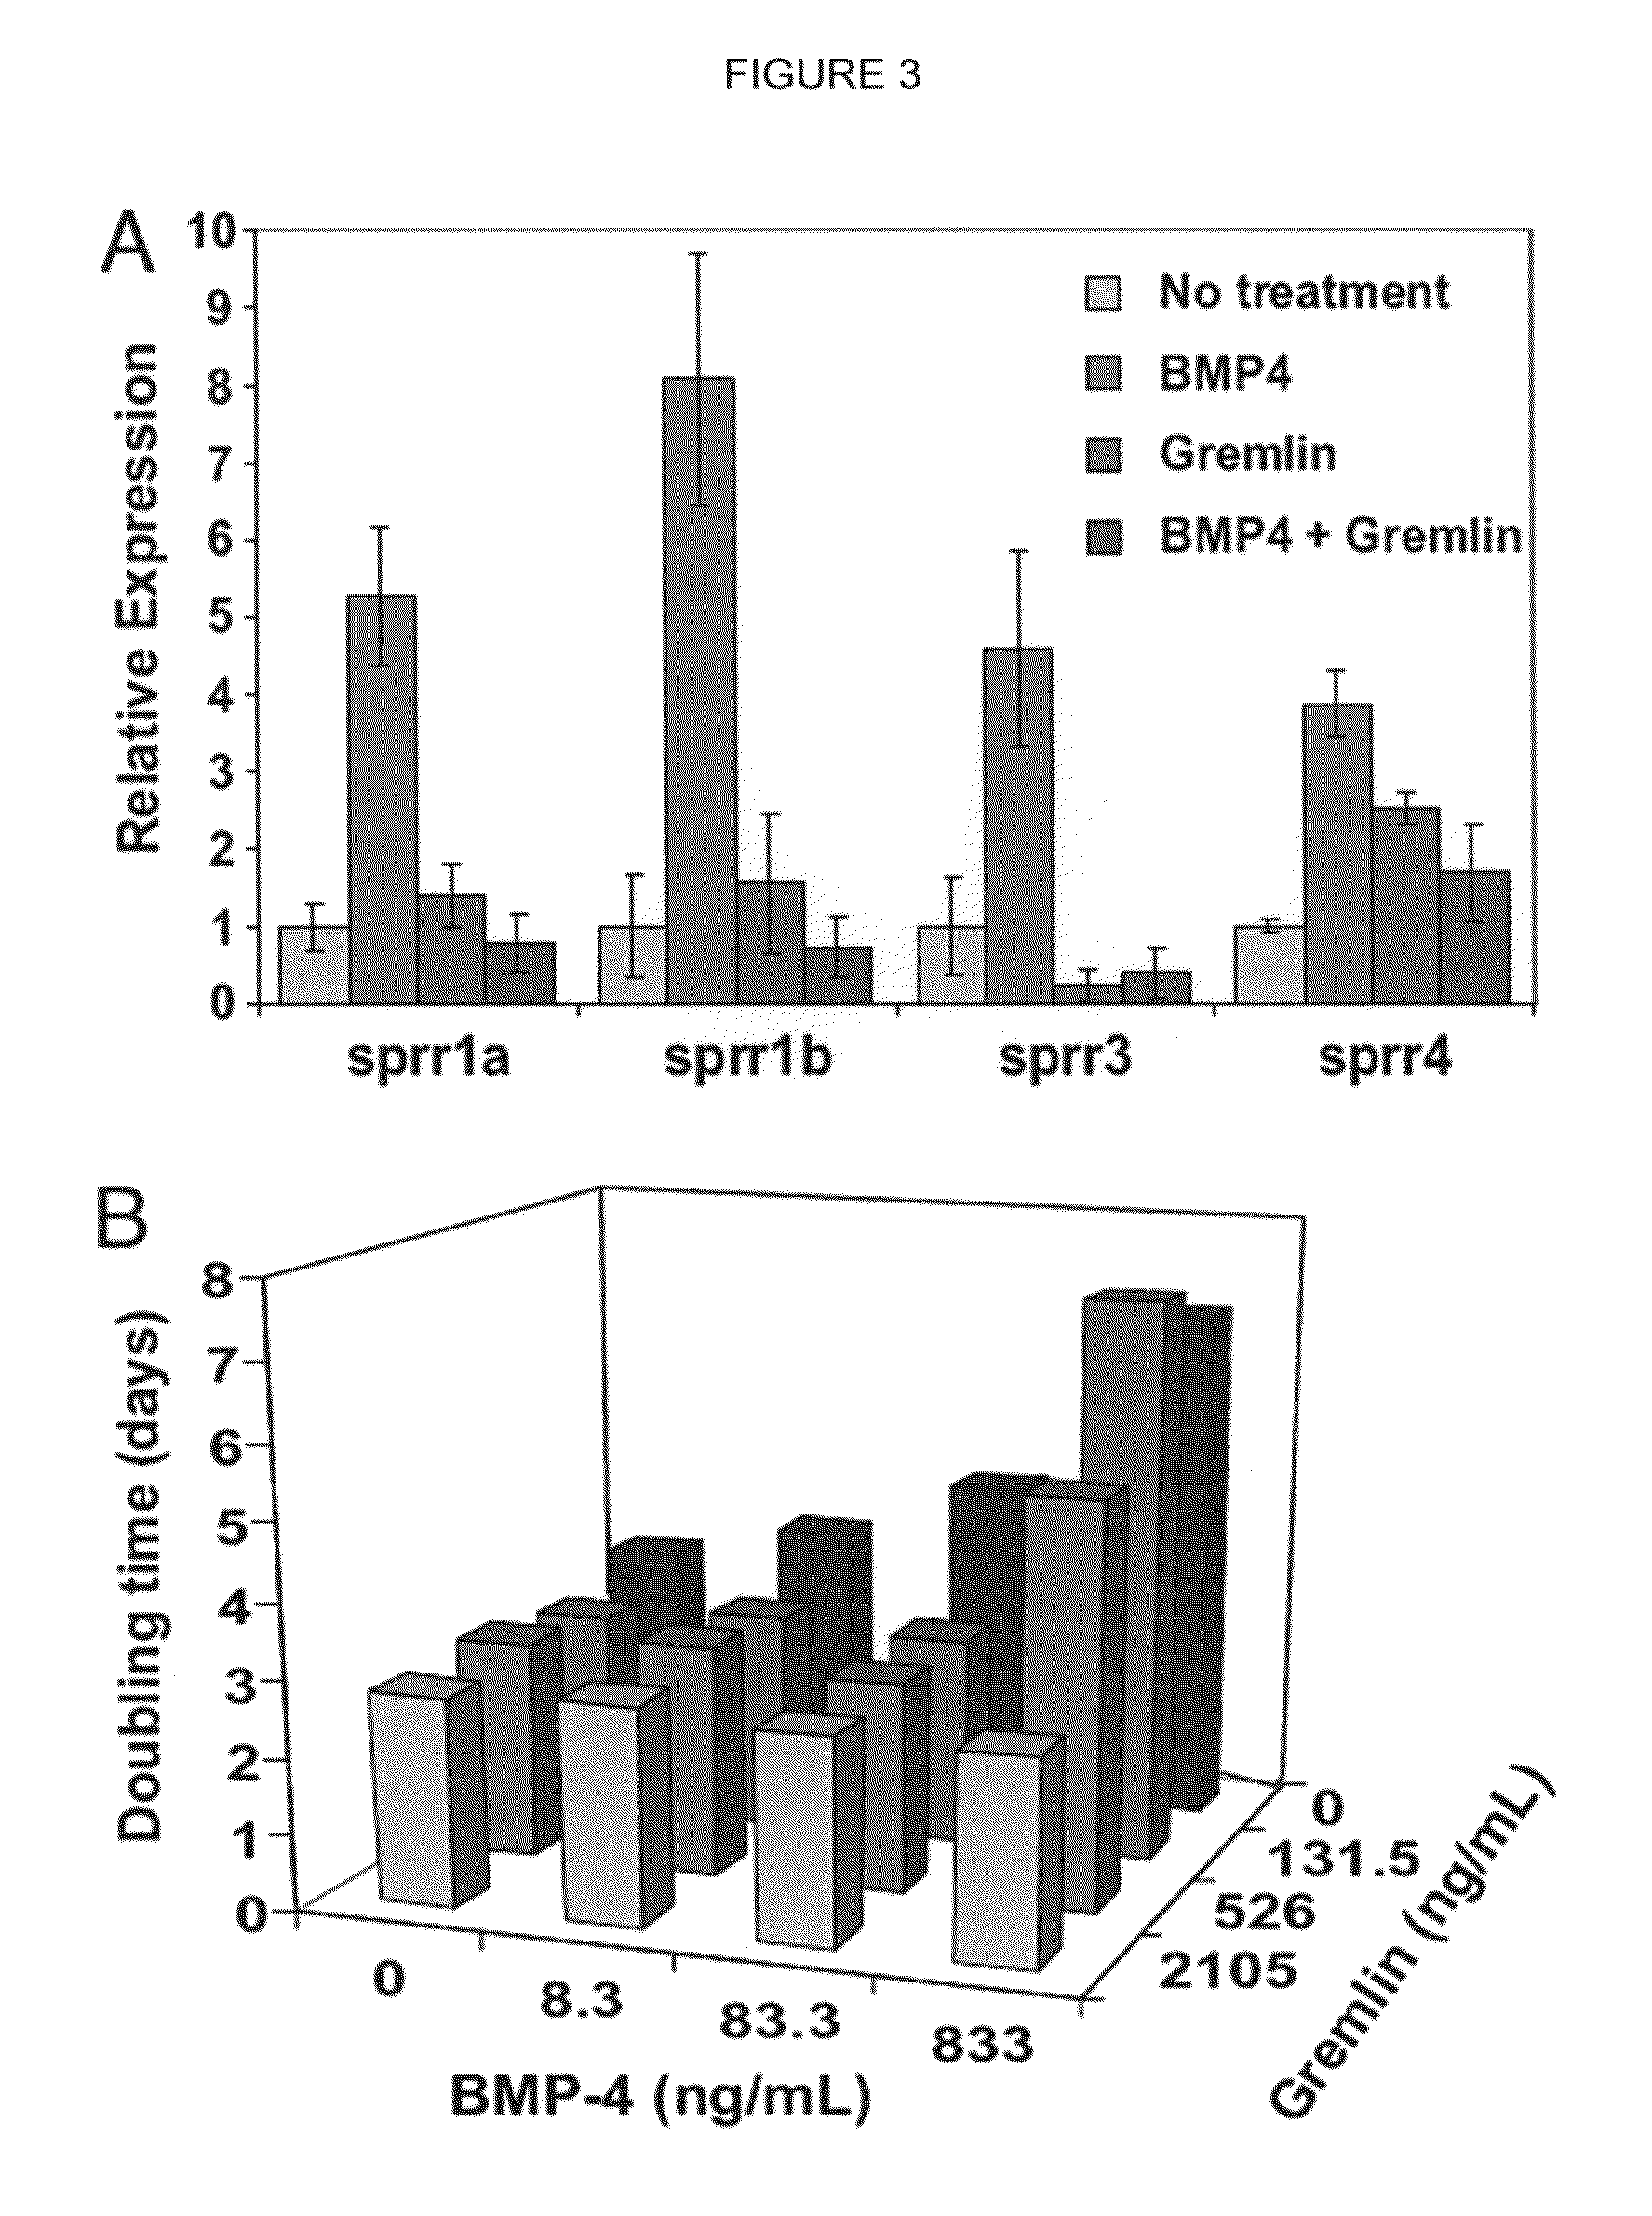 Bone morphogenetic protein antagonist and uses thereof